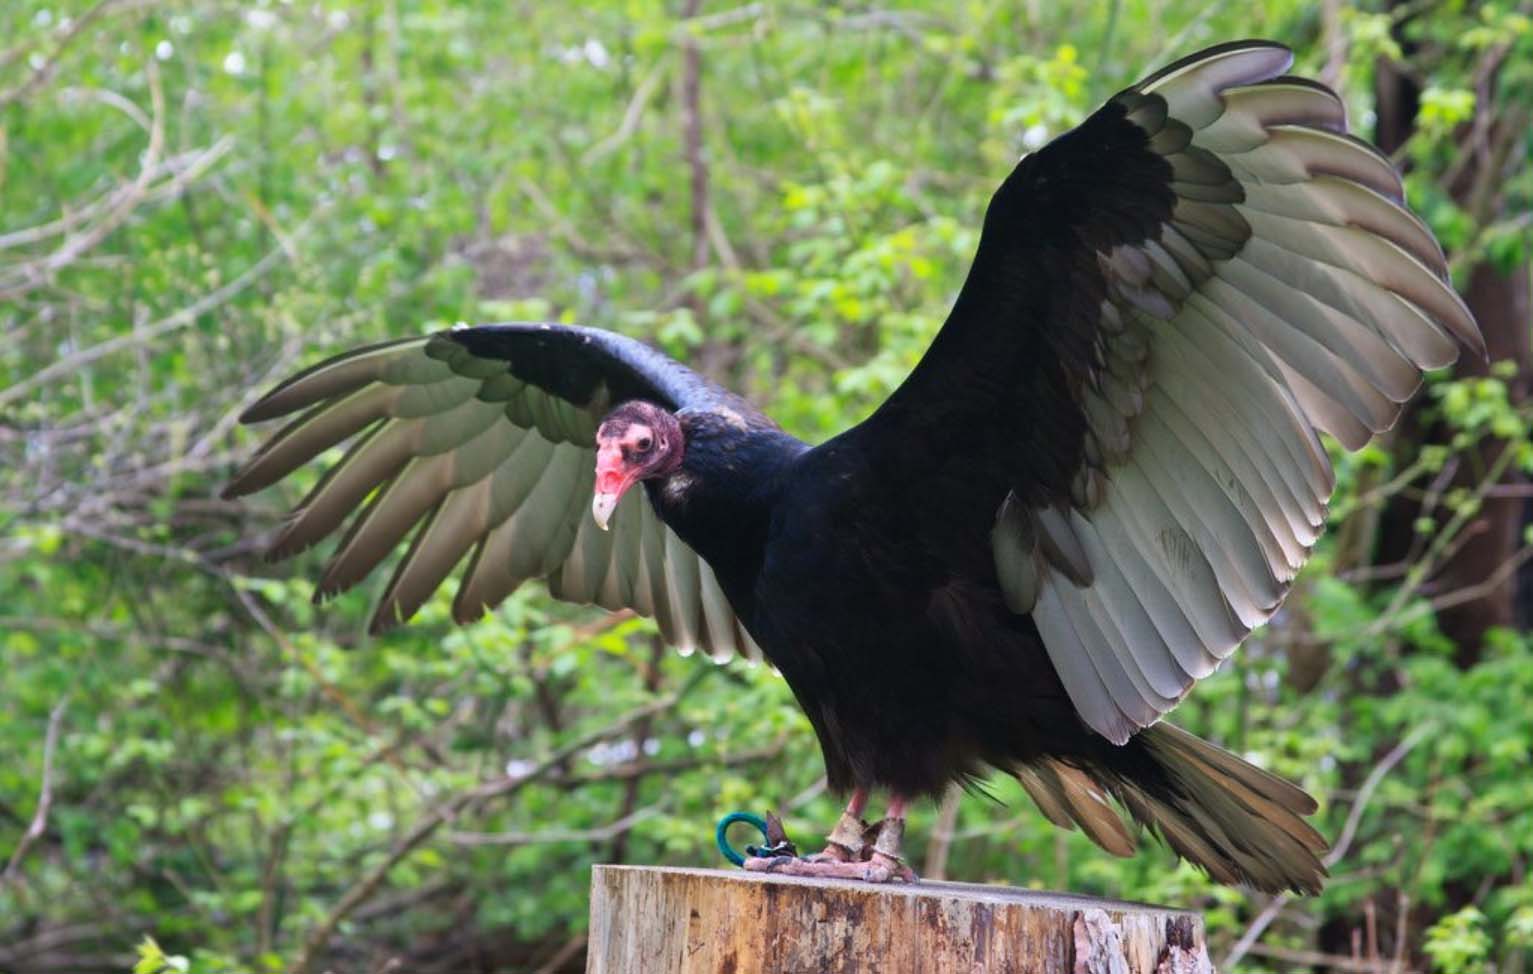 Turkey Vultures Or Black Vultures Buffalo Bill Center Of The West,Grilled Salmon Poke Bowl Recipe